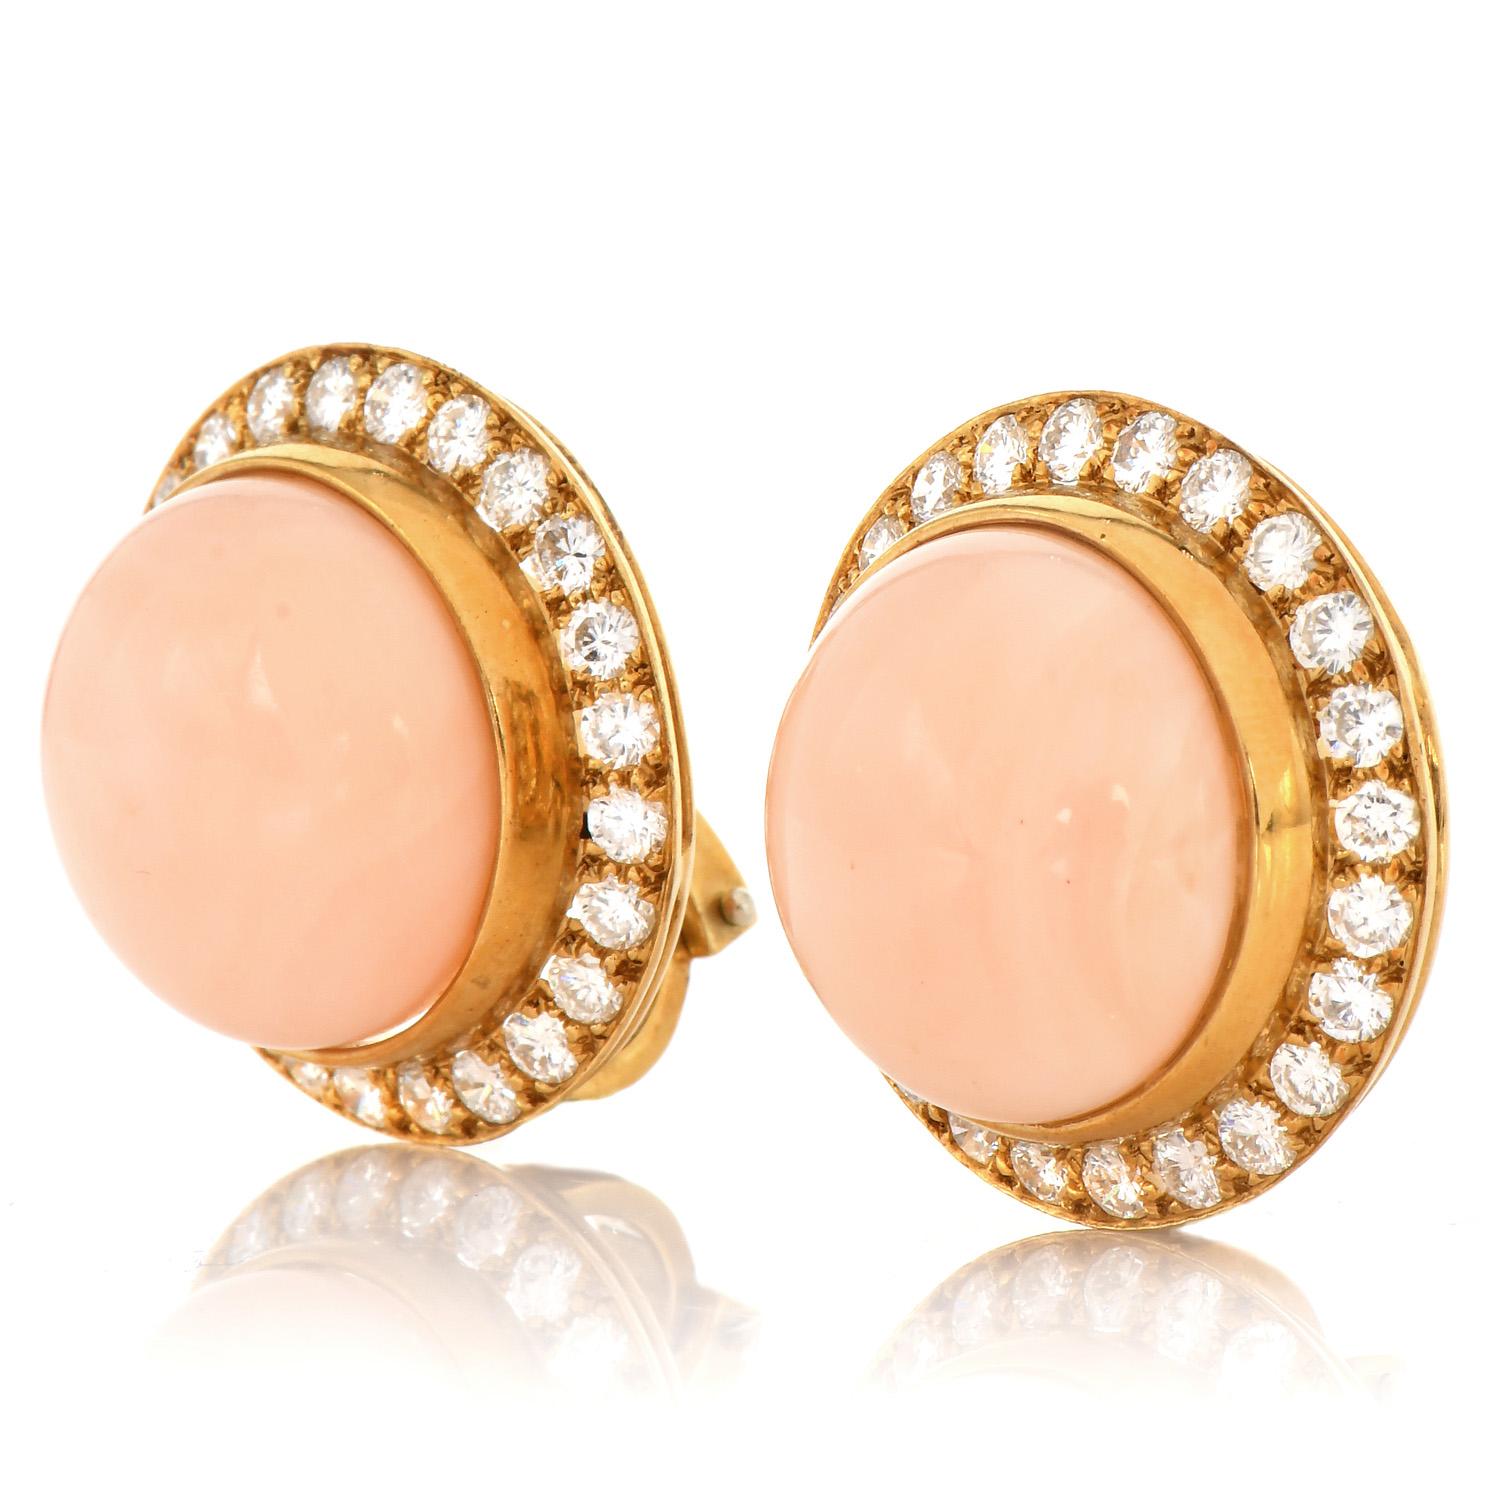 This Vintage 1980's earring features two large genuine Pink Coral gemstones with a Diamond Halo. 

This piece is crafted in solid 18K Yellow Gold. Signed Lilli, a famous jewelry designer in Florida in the 1980s.

The center is adorned by Two genuine